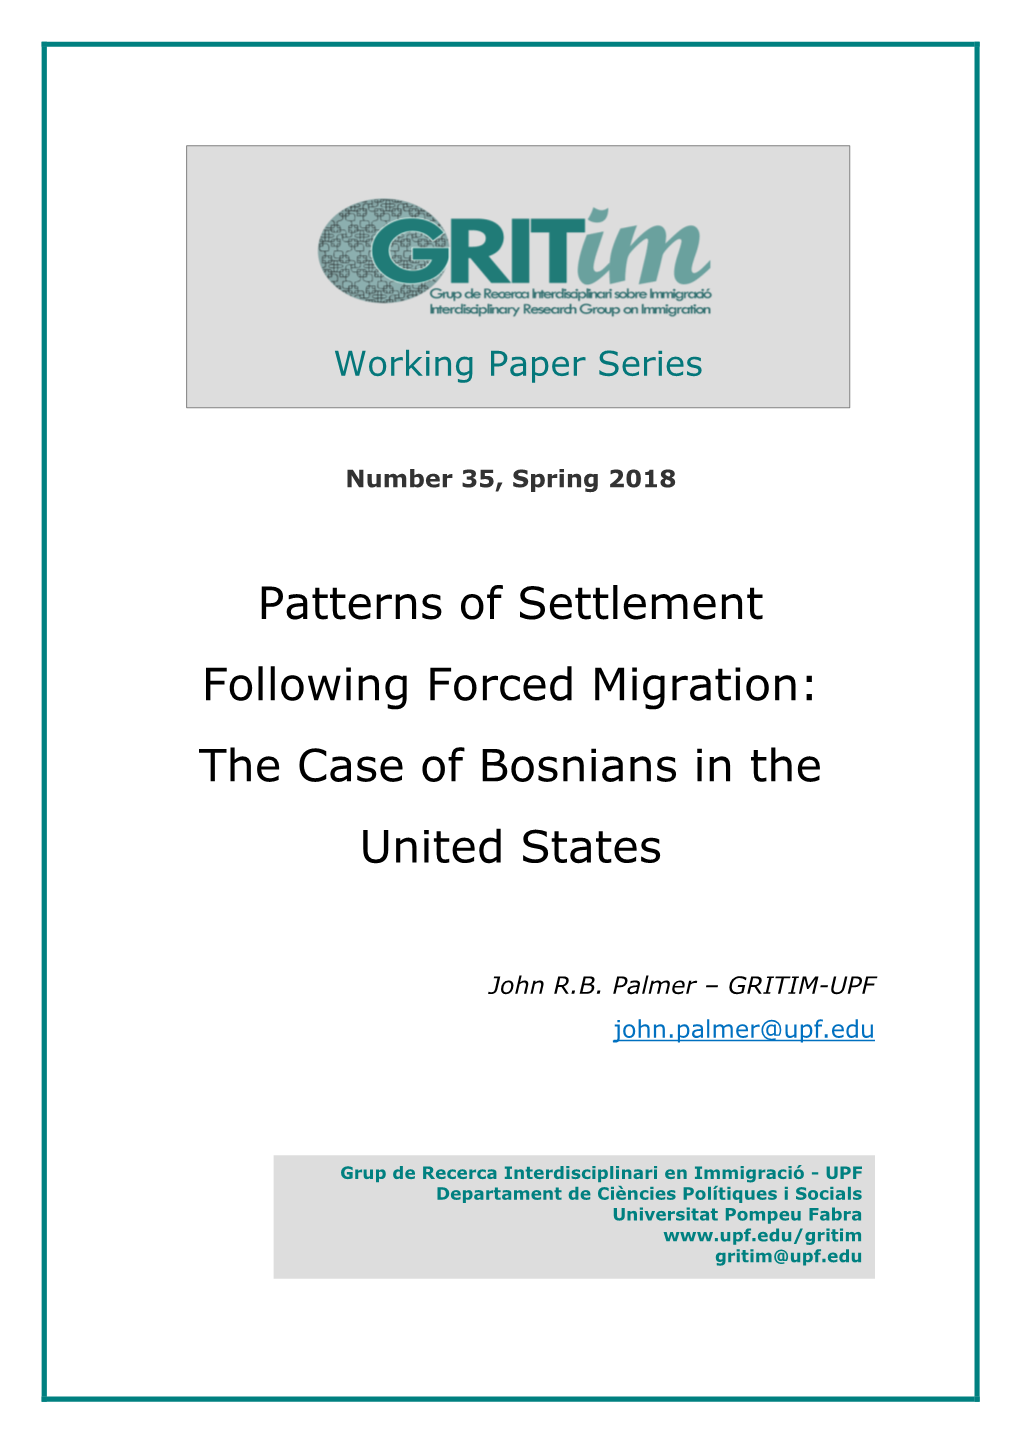 Patterns of Settlement Following Forced Migration: the Case of Bosnians in the United States